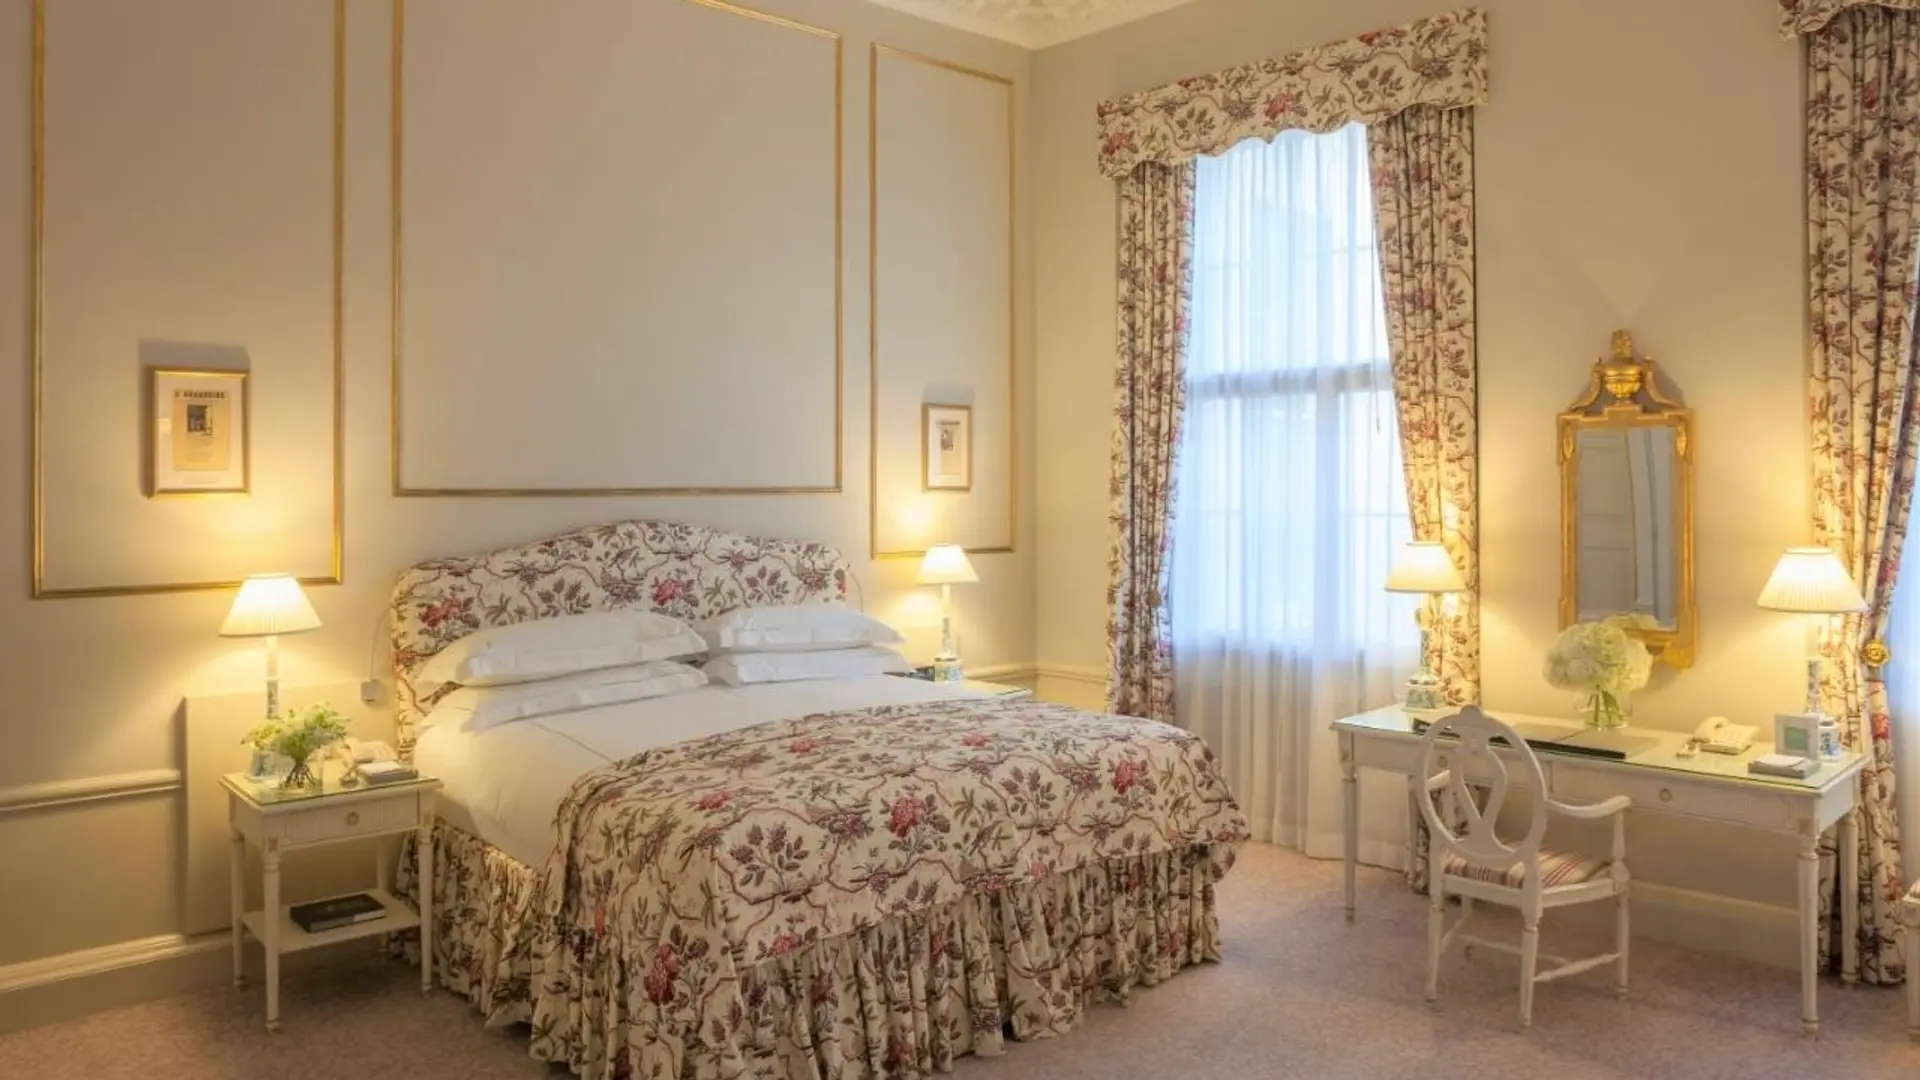 Hotel review Accommodation' - The Merrion Hotel - 2